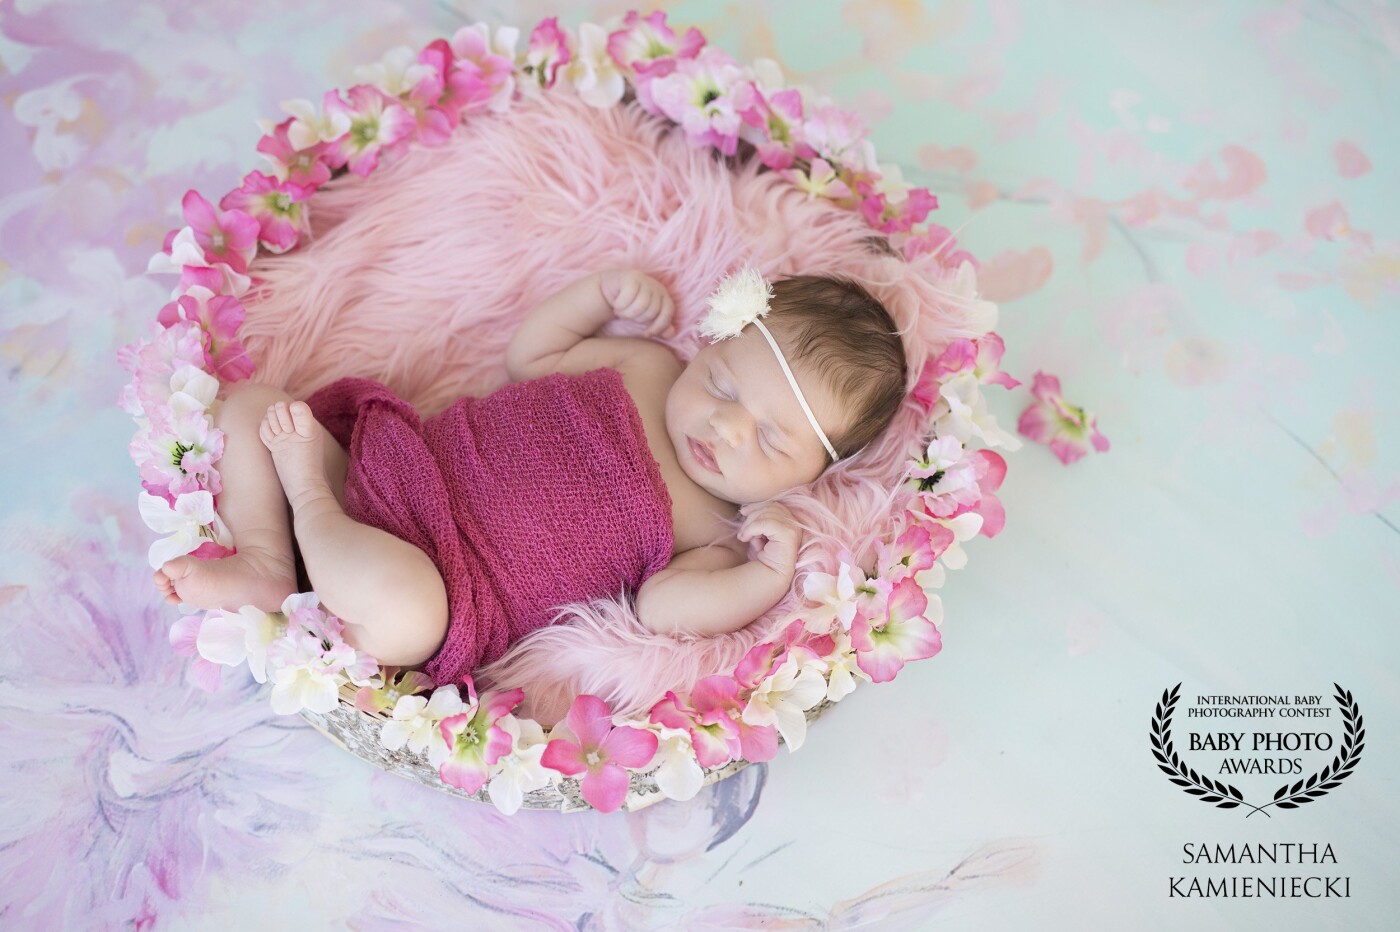 This is my first win and first time entering.  This beautiful angel was done as an in home session. She was such an amazing baby to work with! 